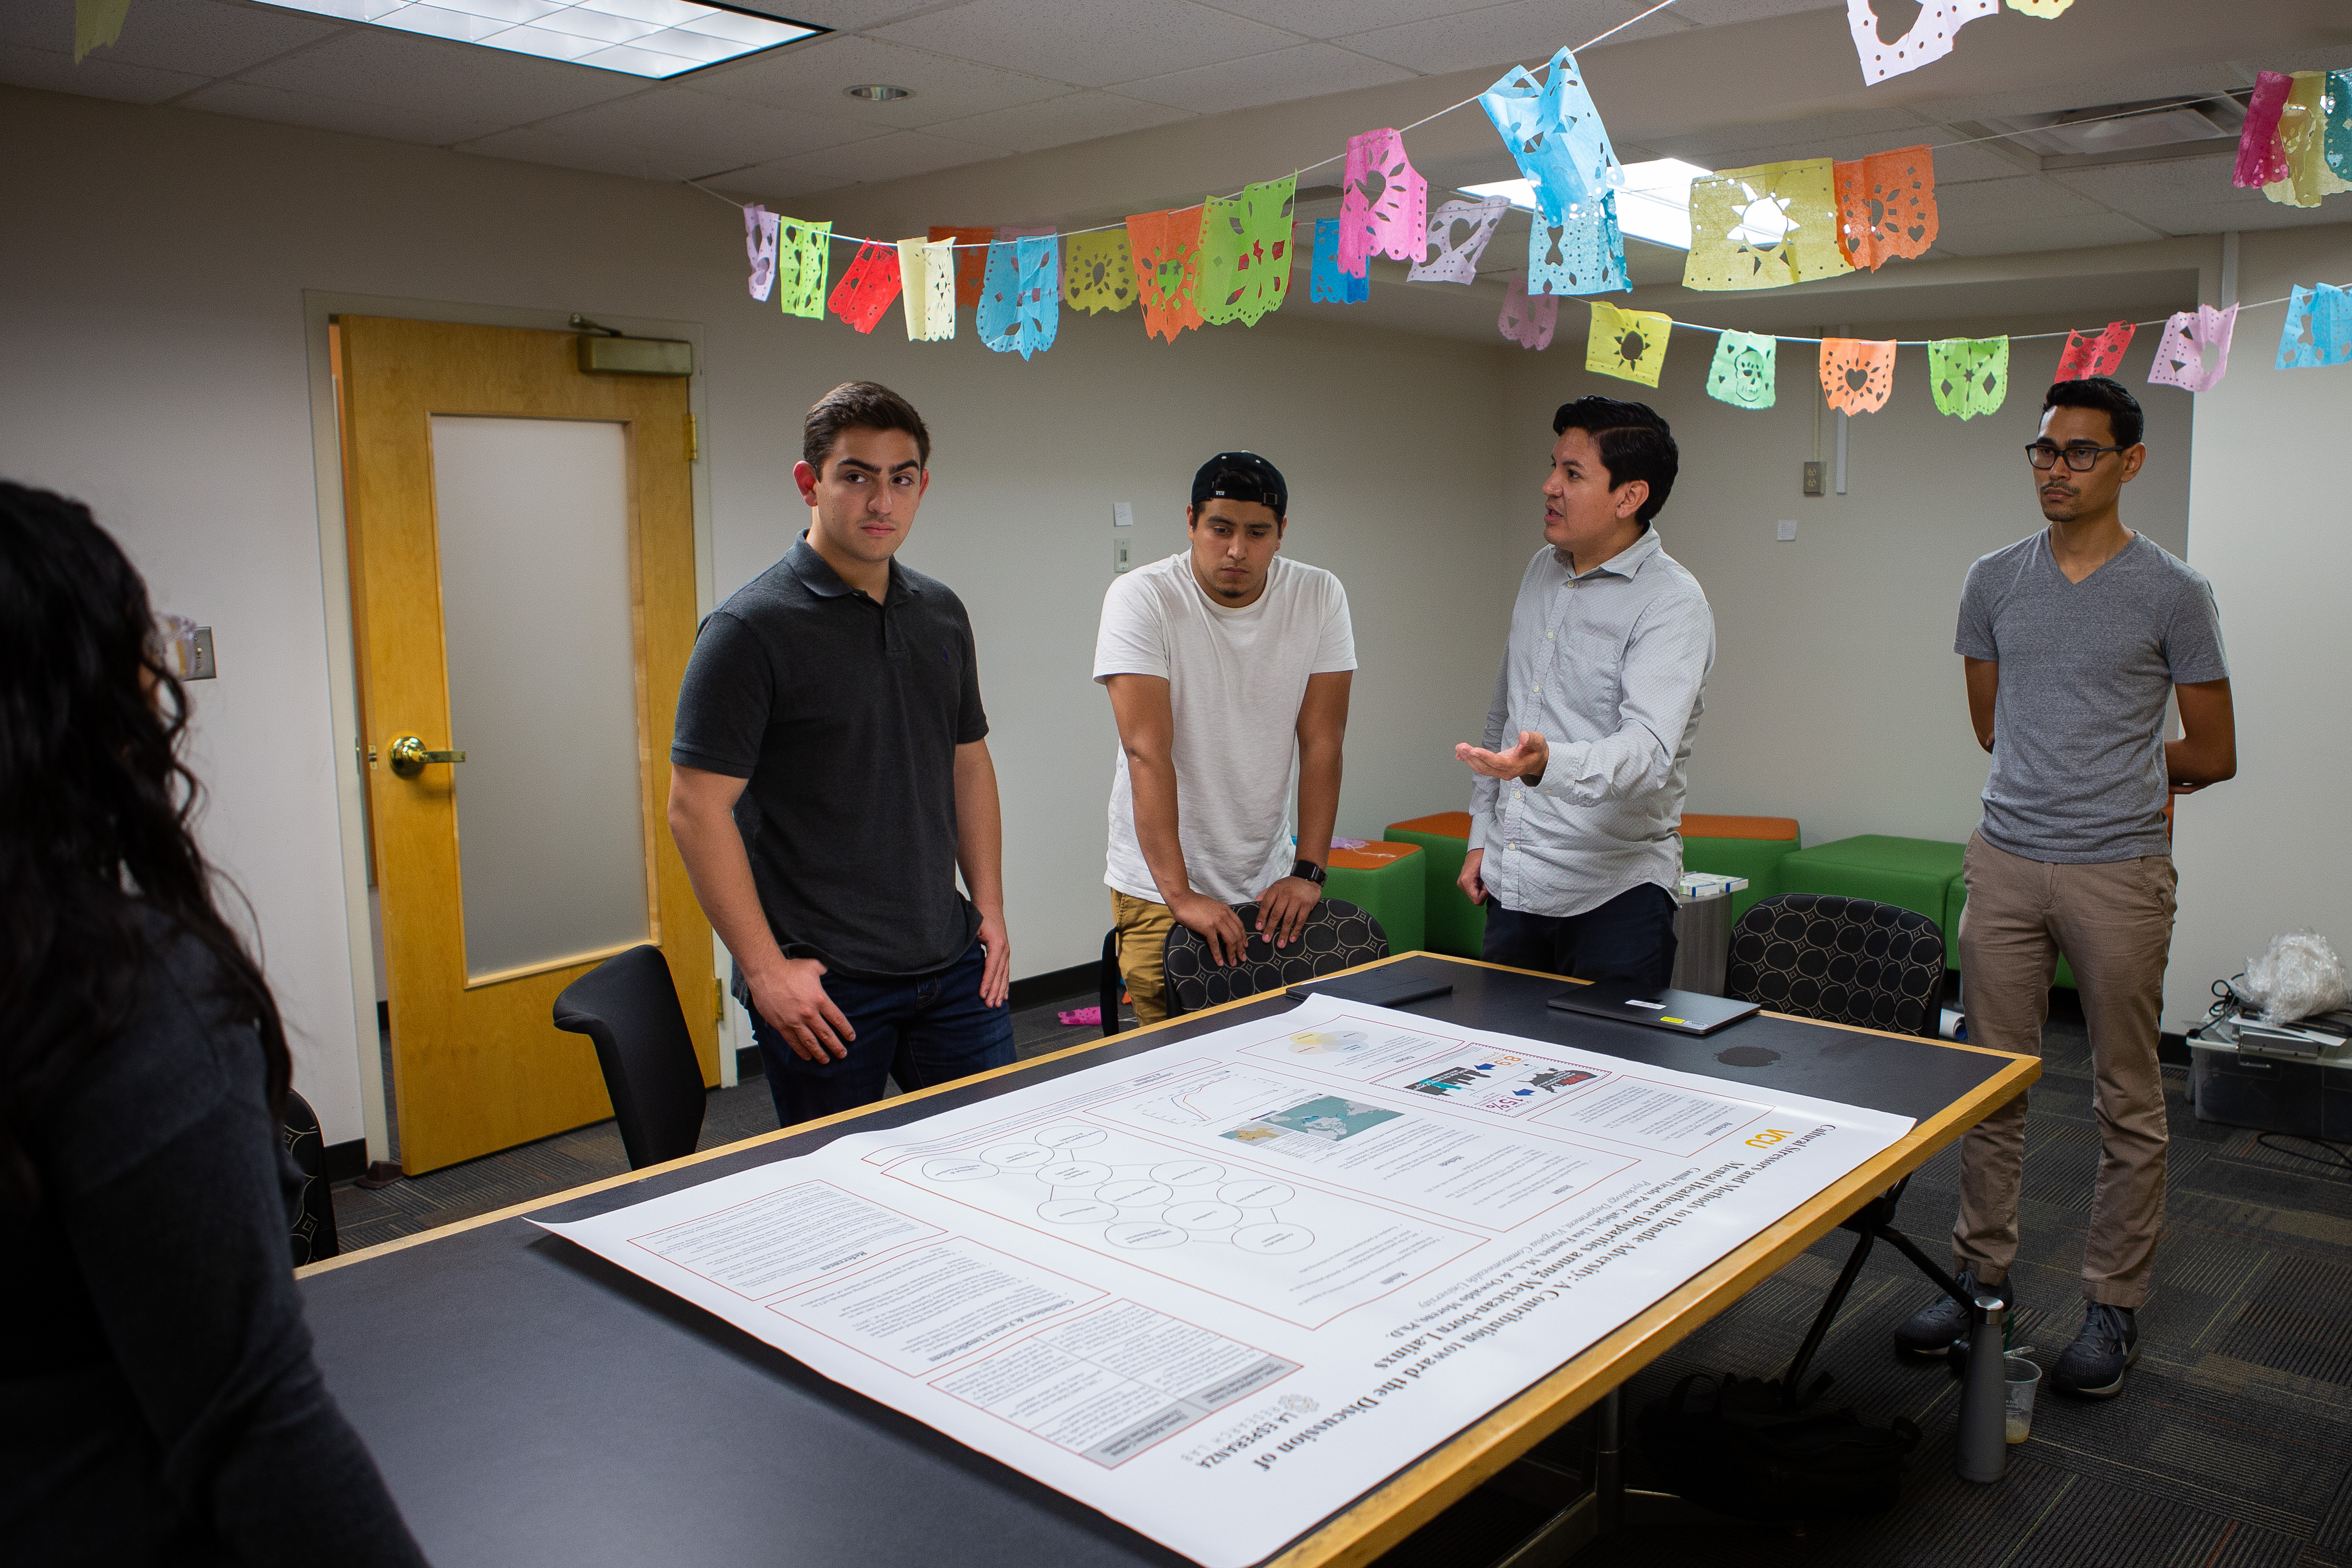 Students standing around a table with a large poster on it, discussing the contents.